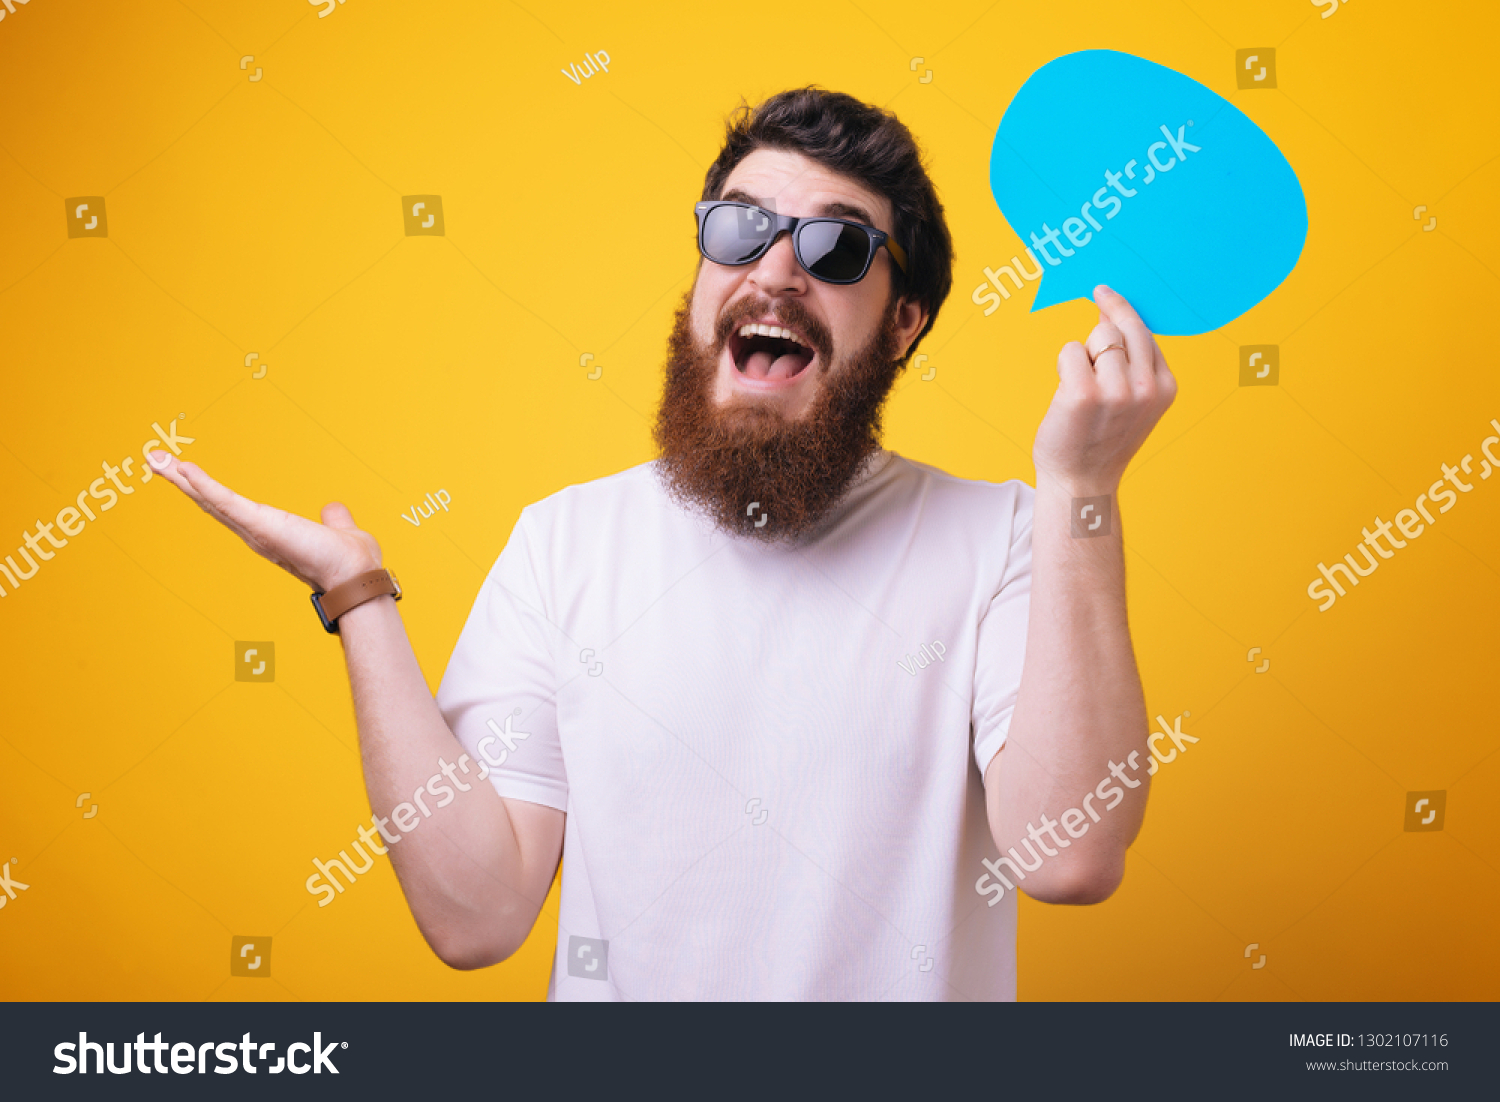 Share opinion speech bubble copy space. Men with beard mature hipster wear sunglasses. Explain humor concept. Funny story and humor. #1302107116